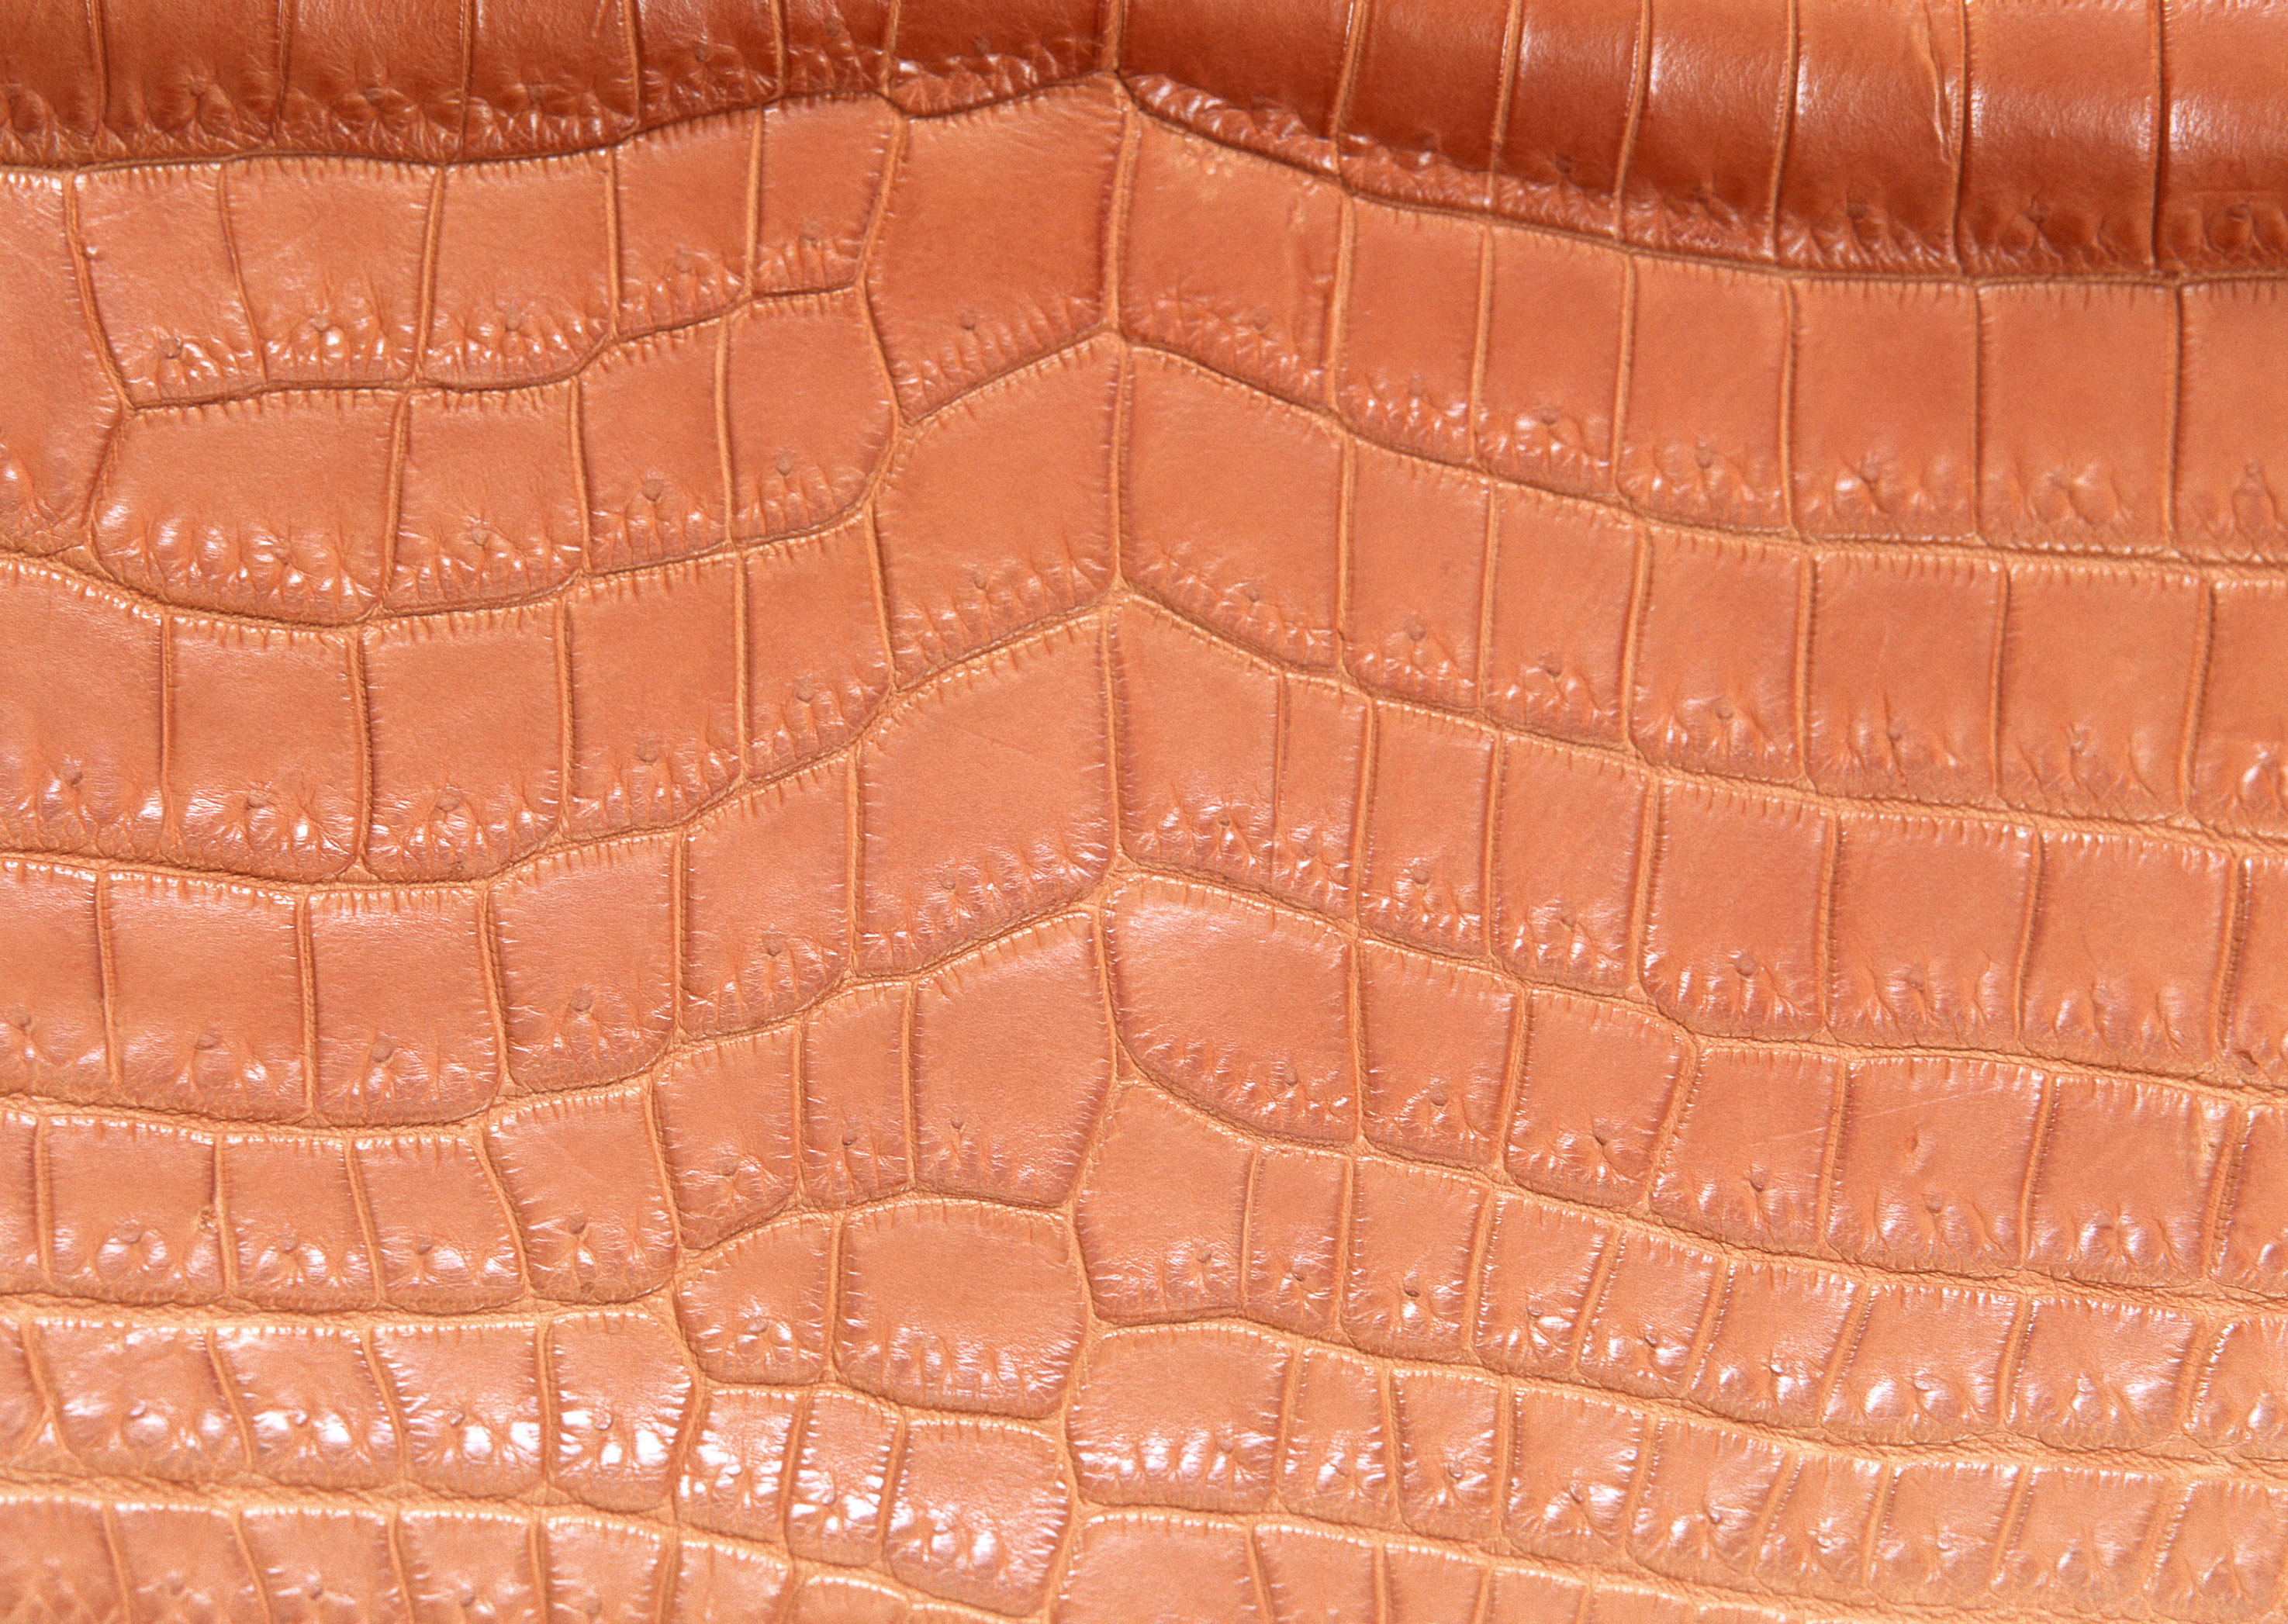 Brown snake leather texture background image download, snakes